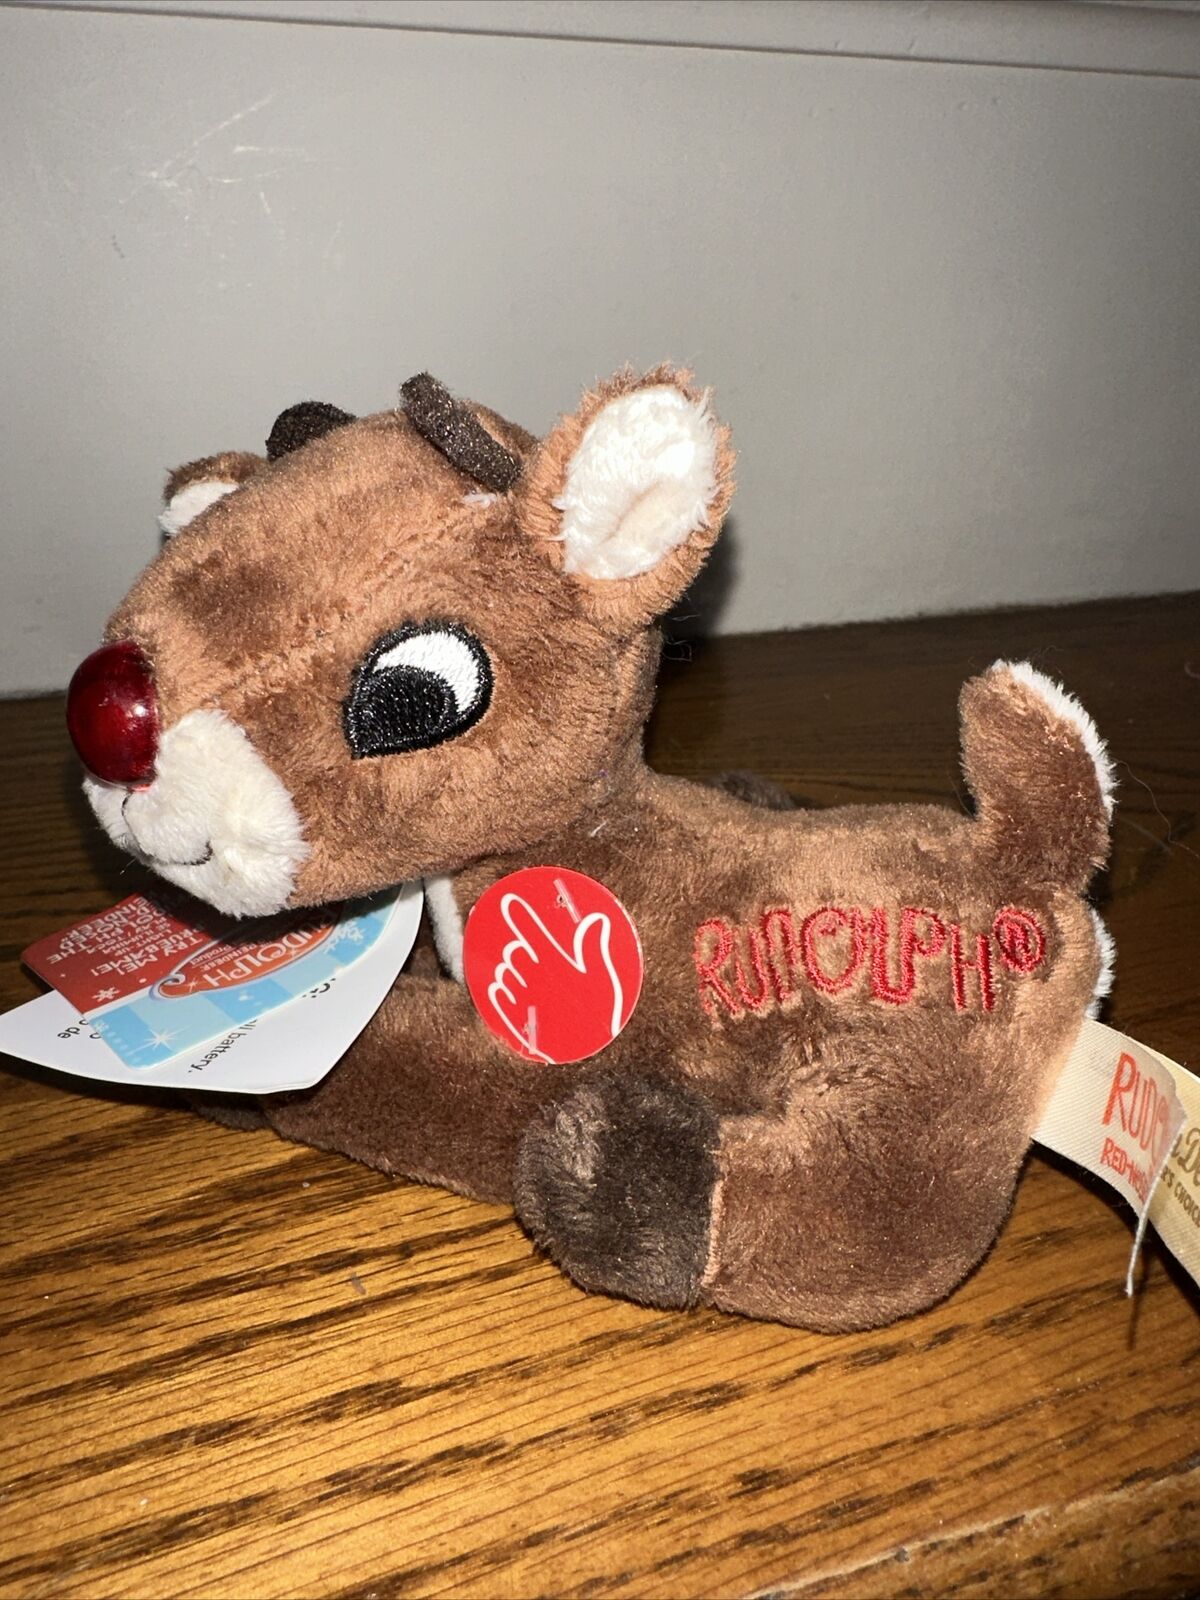 RUDOLPH THE RED NOSED REINDEER New Dan Dee Plush Light Up Sing Along 5” 💗242